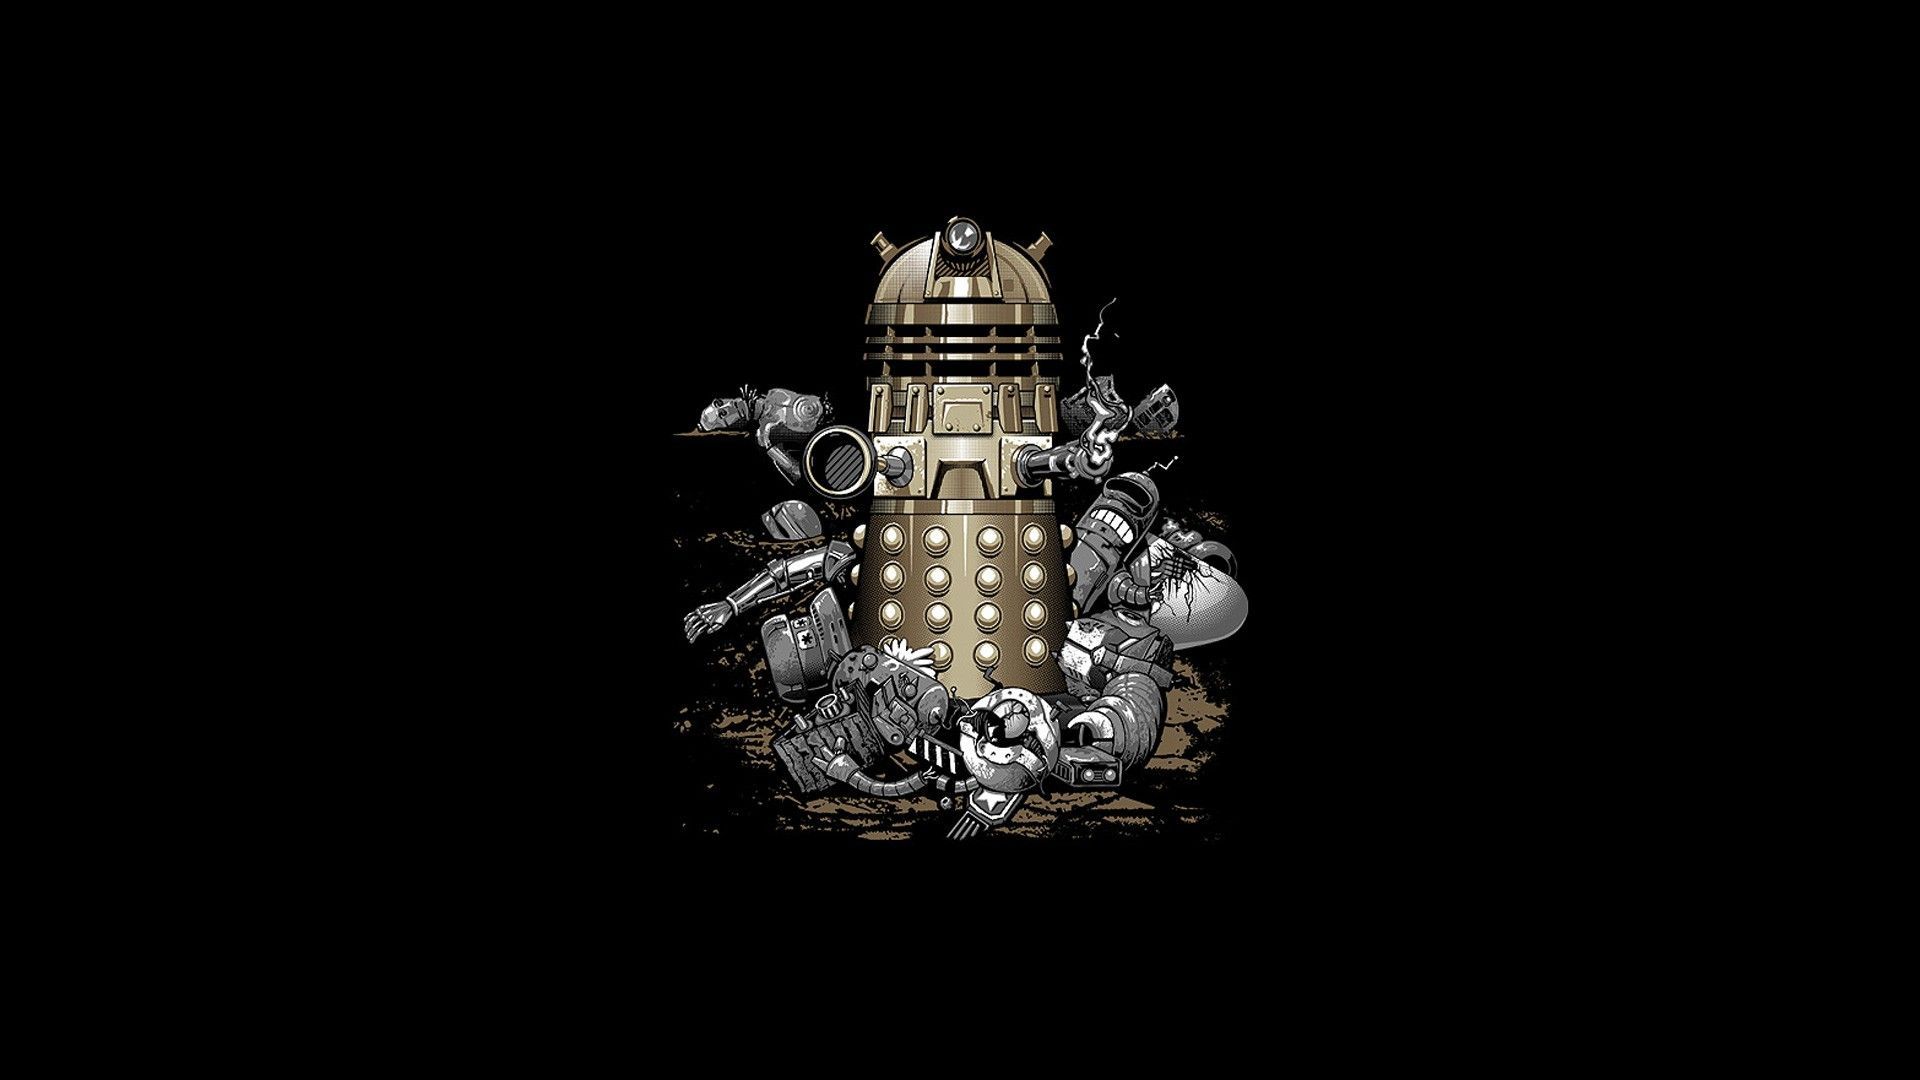 dr.who wallpaper for tablets. Doctor Who HD Wallpaper. Docteur